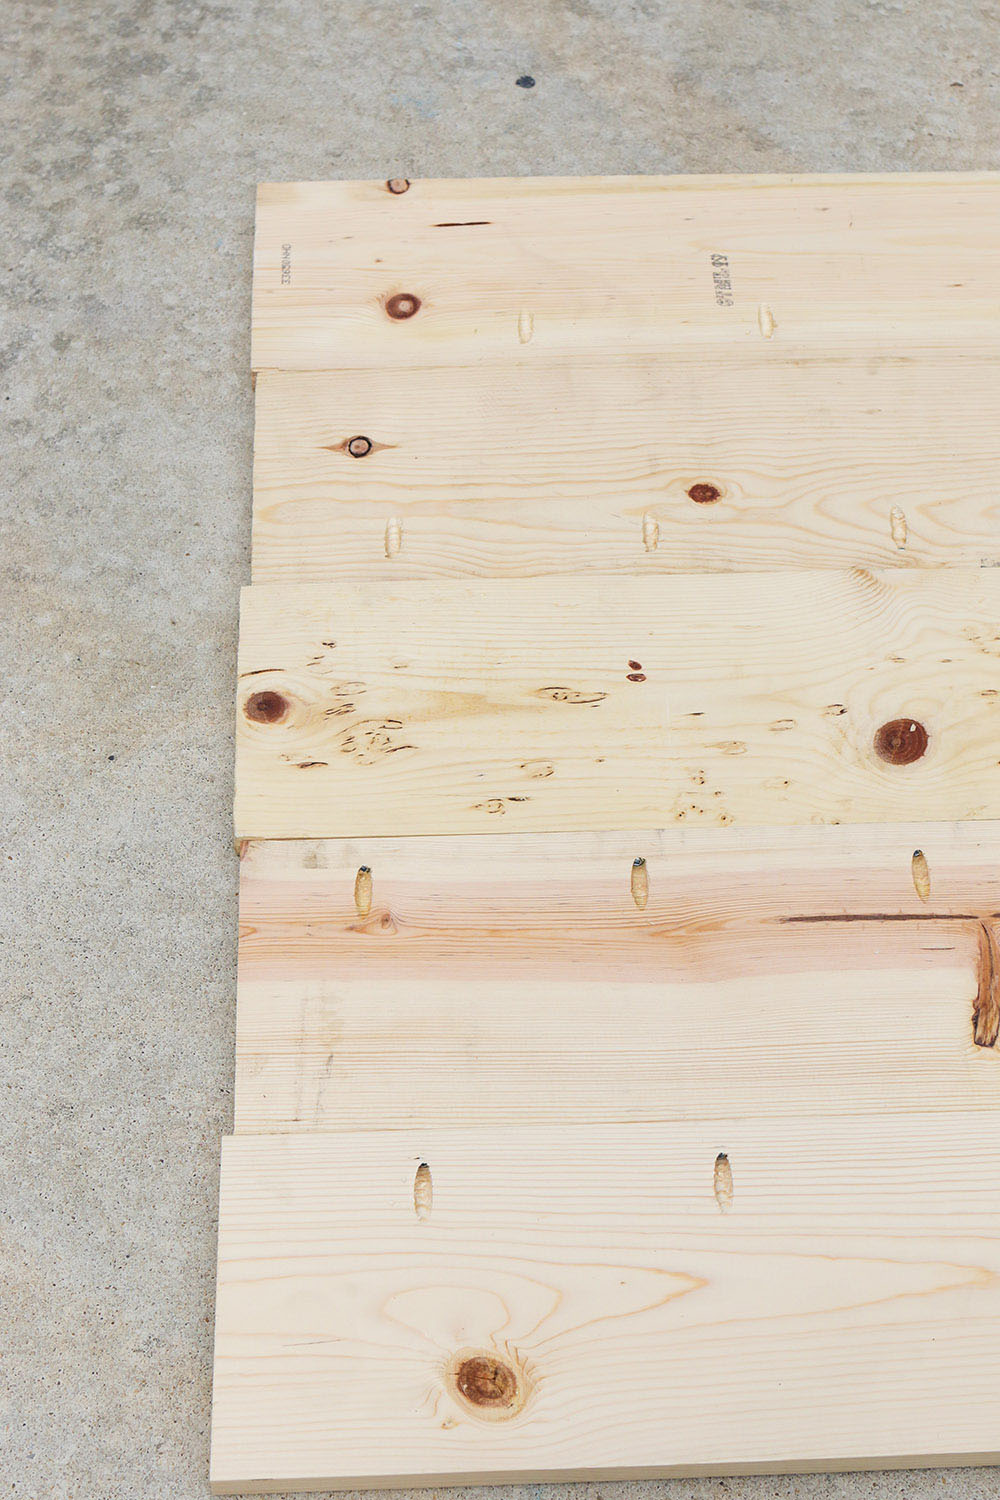 A group of lumber laid out on concrete with pocket holes.